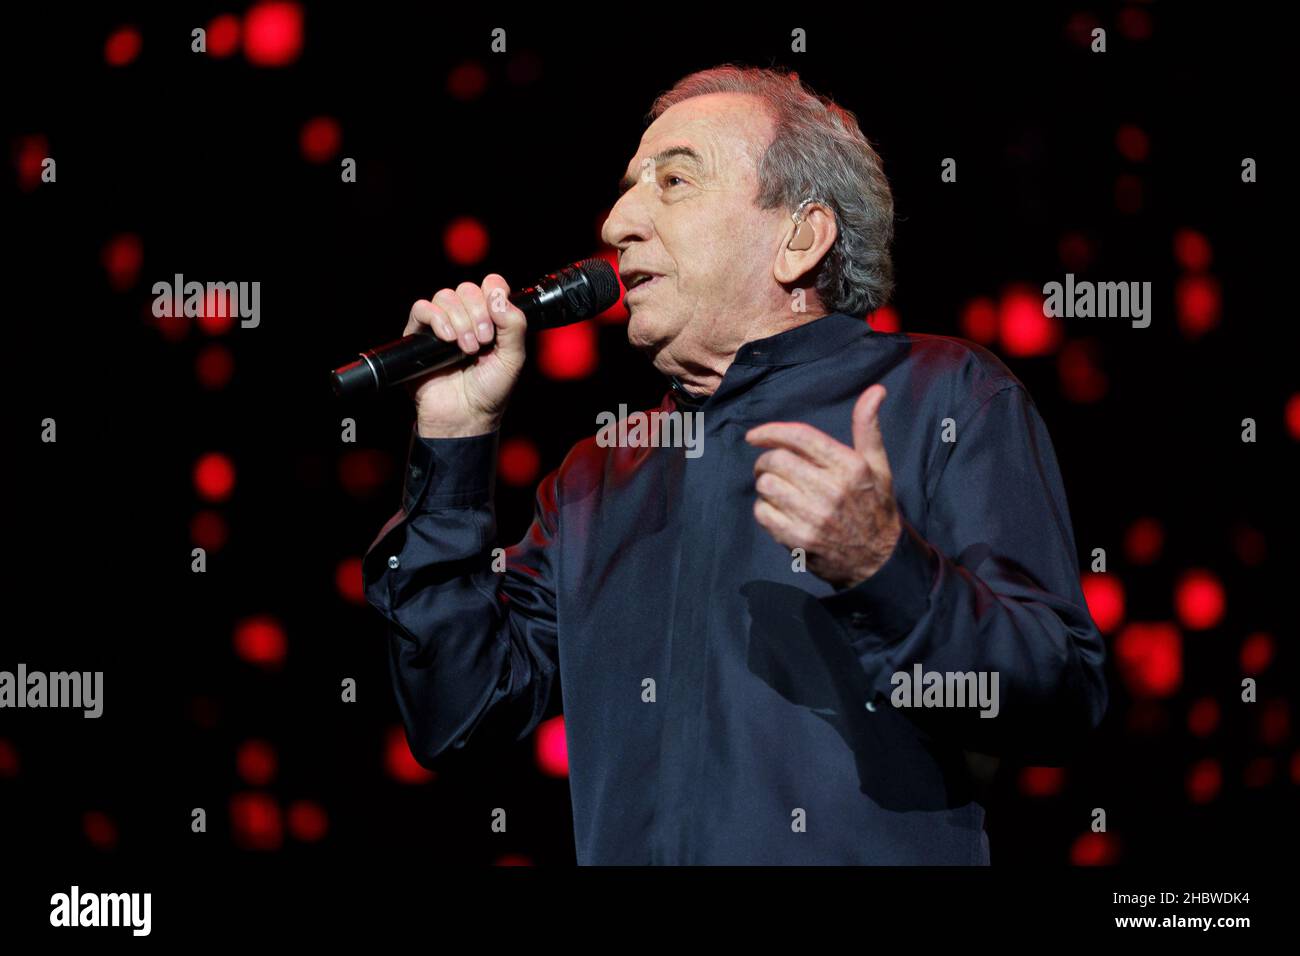 Madrid, Spain. 21st Dec, 2021. Jose Luis Perales the singer seen during his performance at the concert at the Wizink Center. Credit: SOPA Images Limited/Alamy Live News Stock Photo